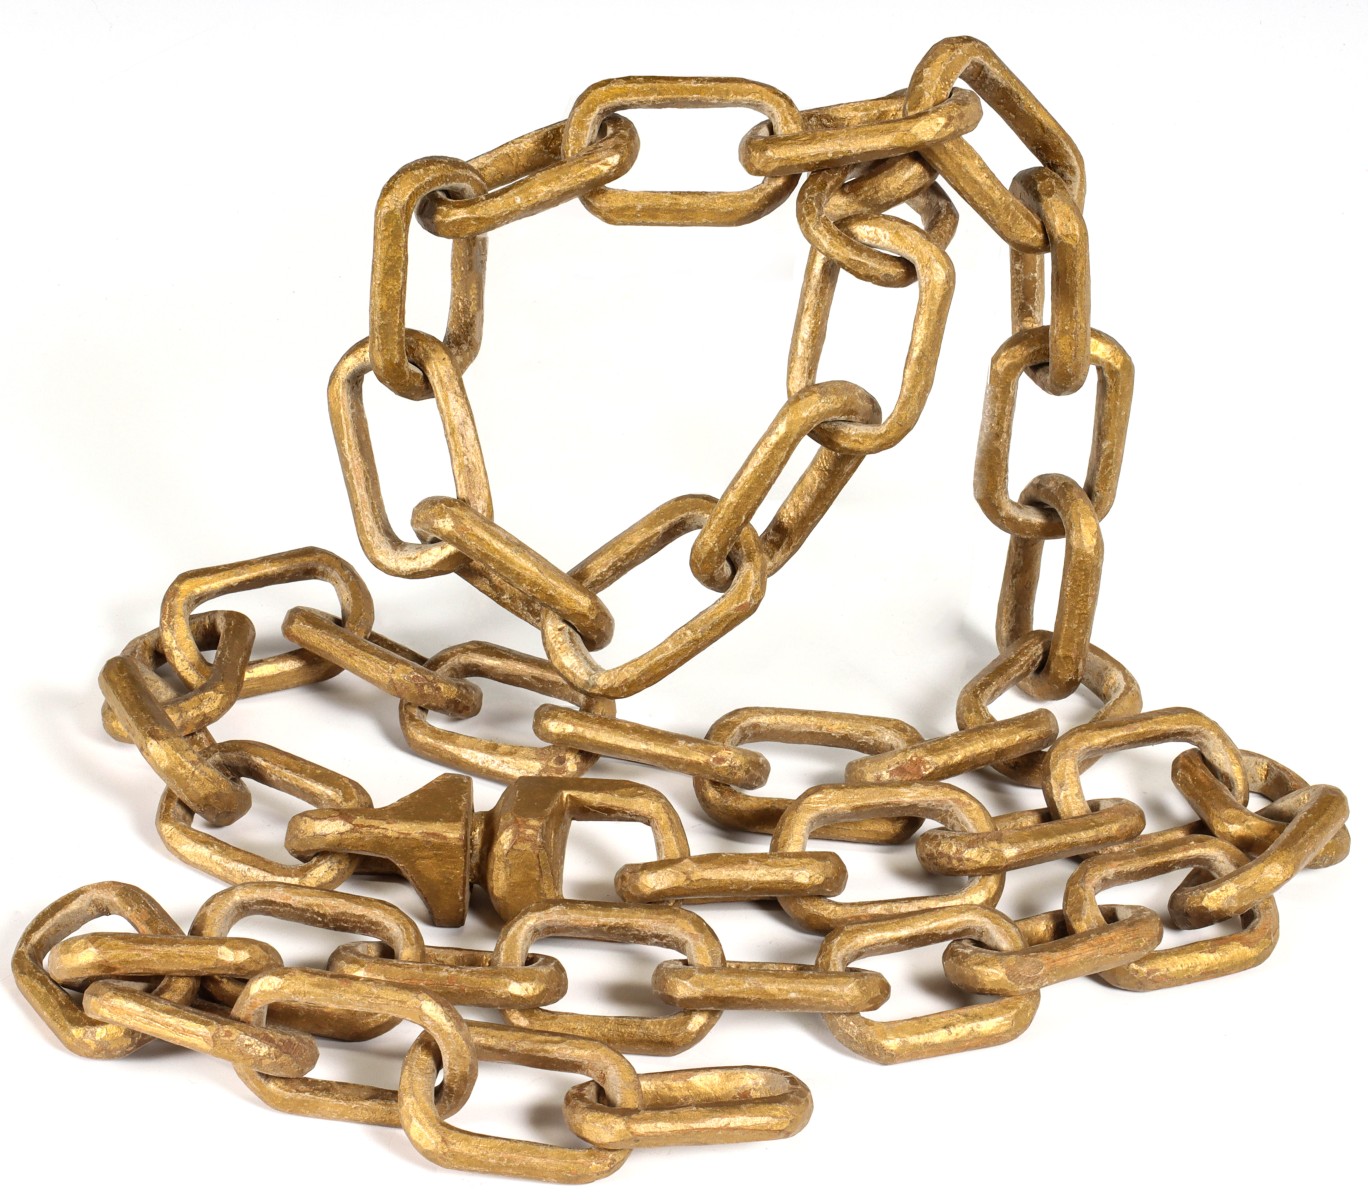 A CARVED WOOD FOLK ART CHAIN IN ORIGINAL GOLD PAINT